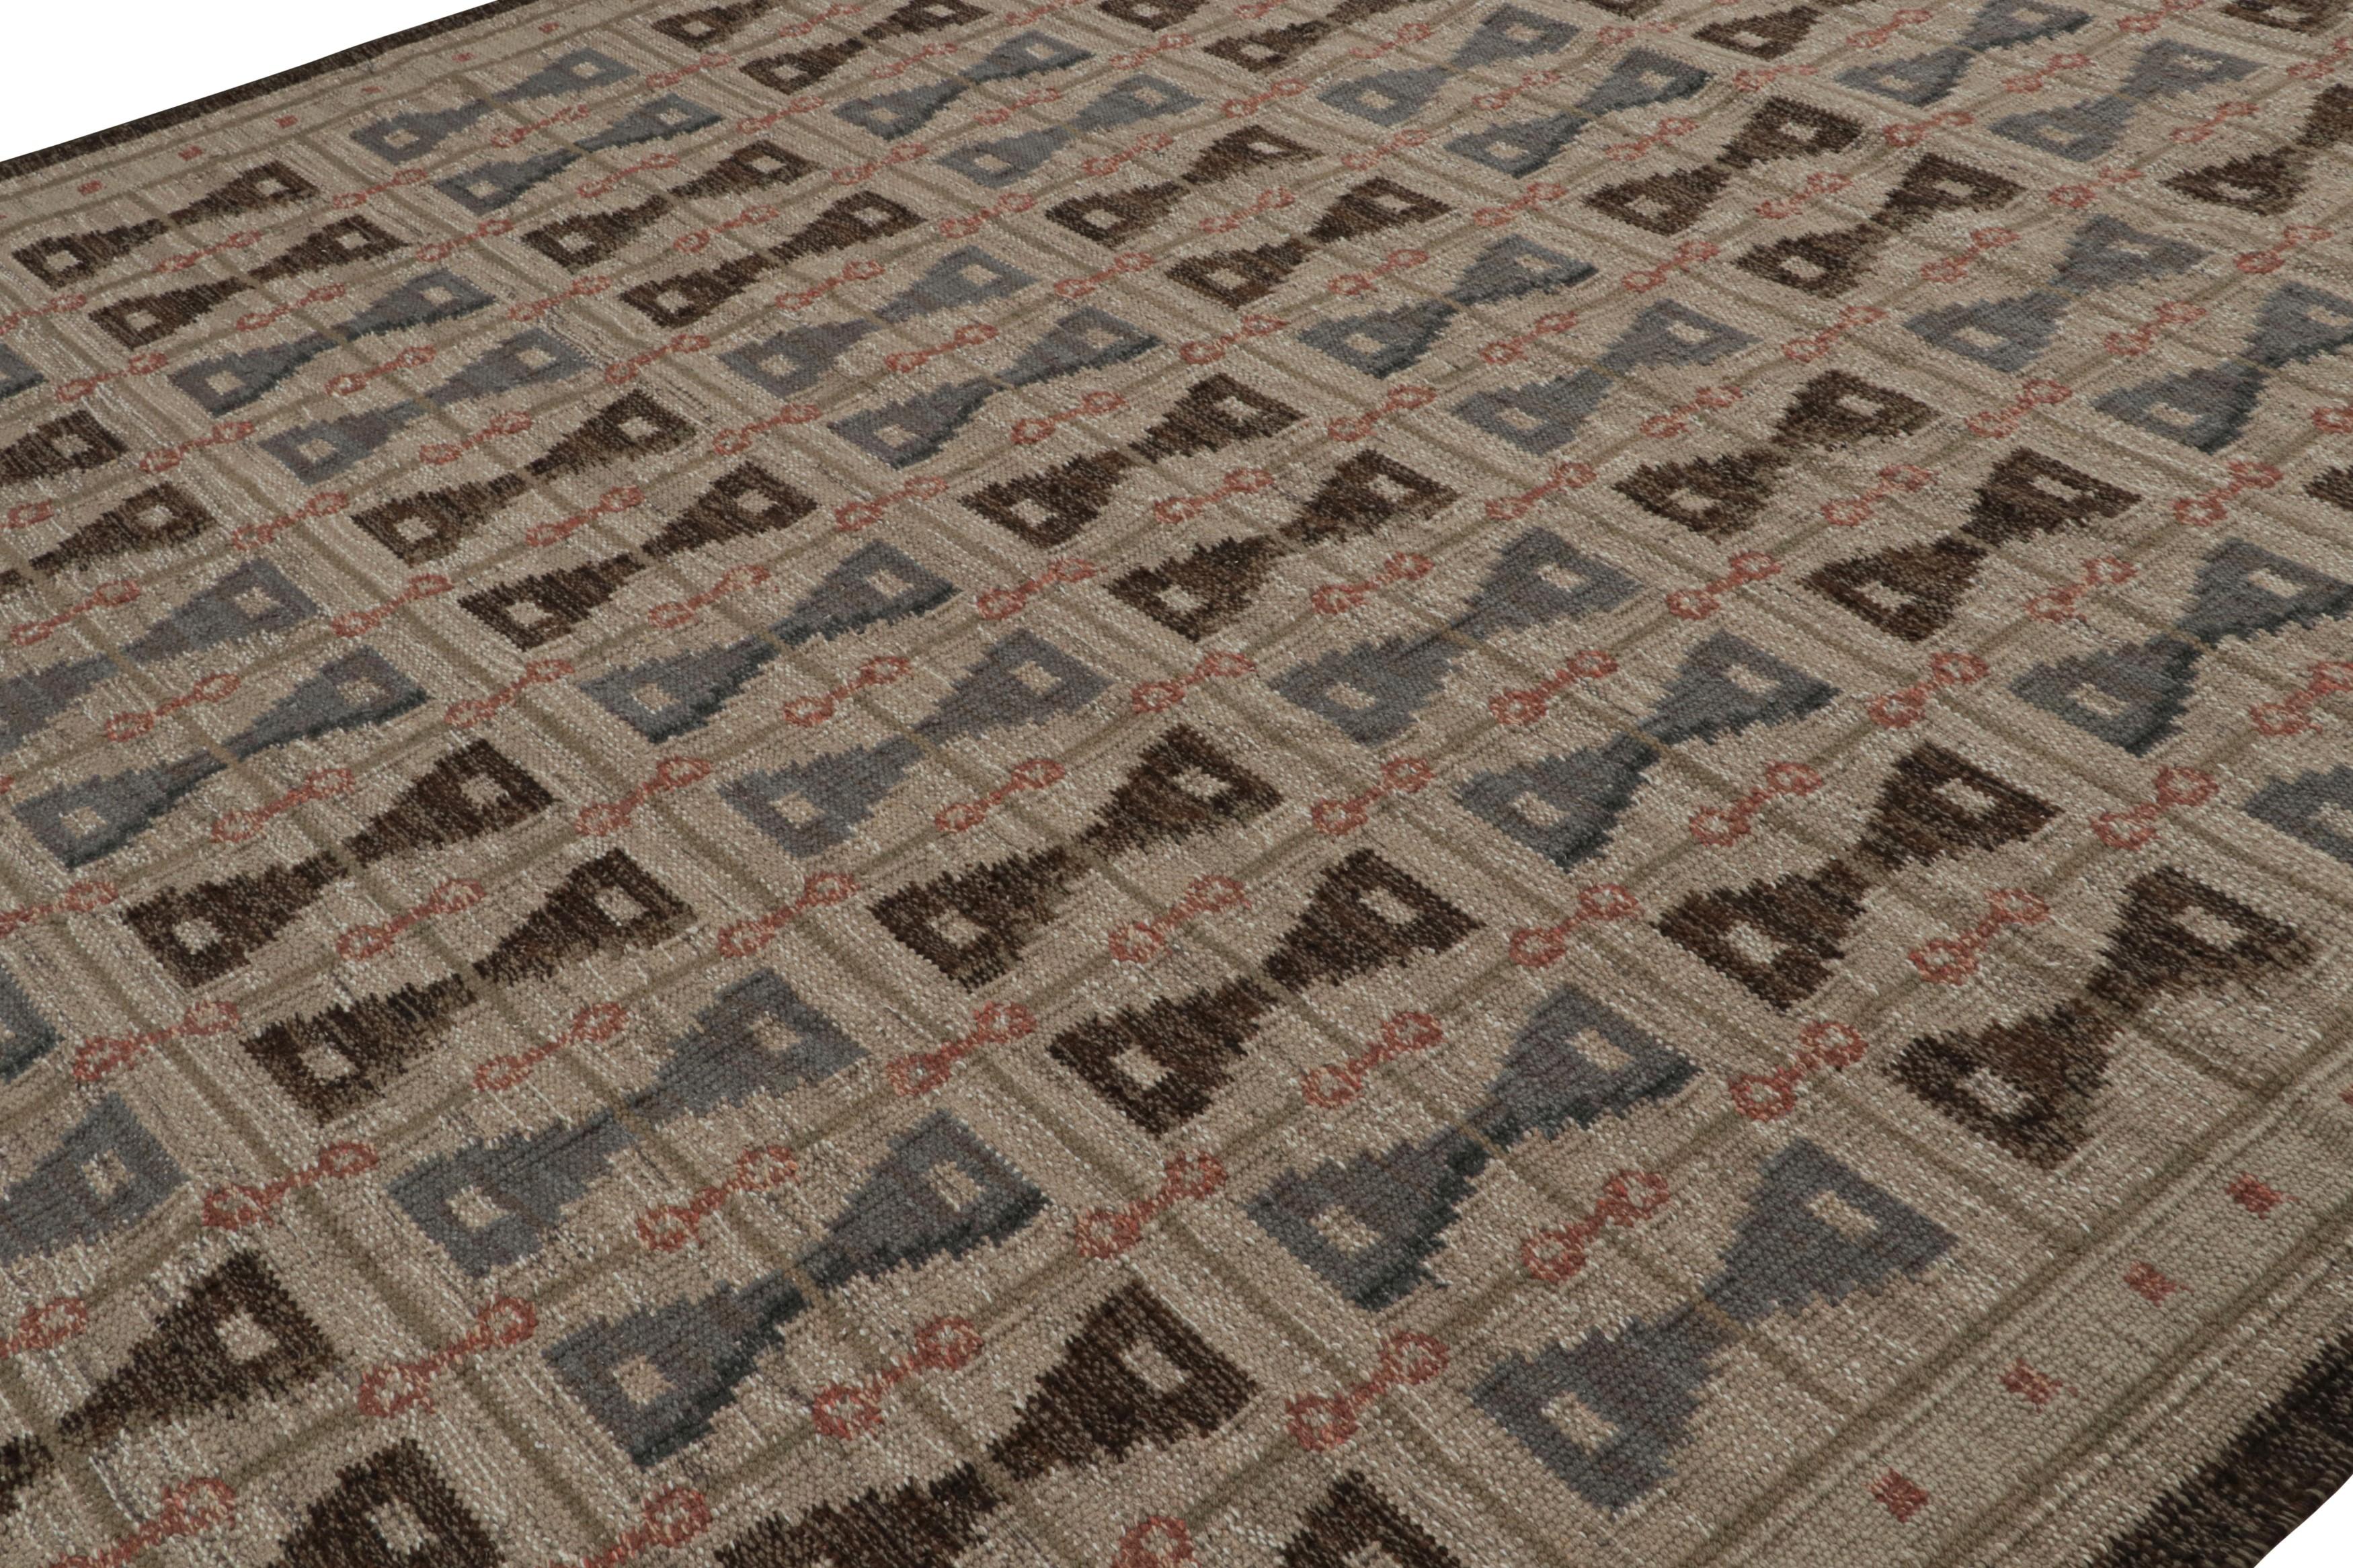 Indian Rug & Kilim’s Scandinavian Style Rug in Brown With Geometric Patterns For Sale